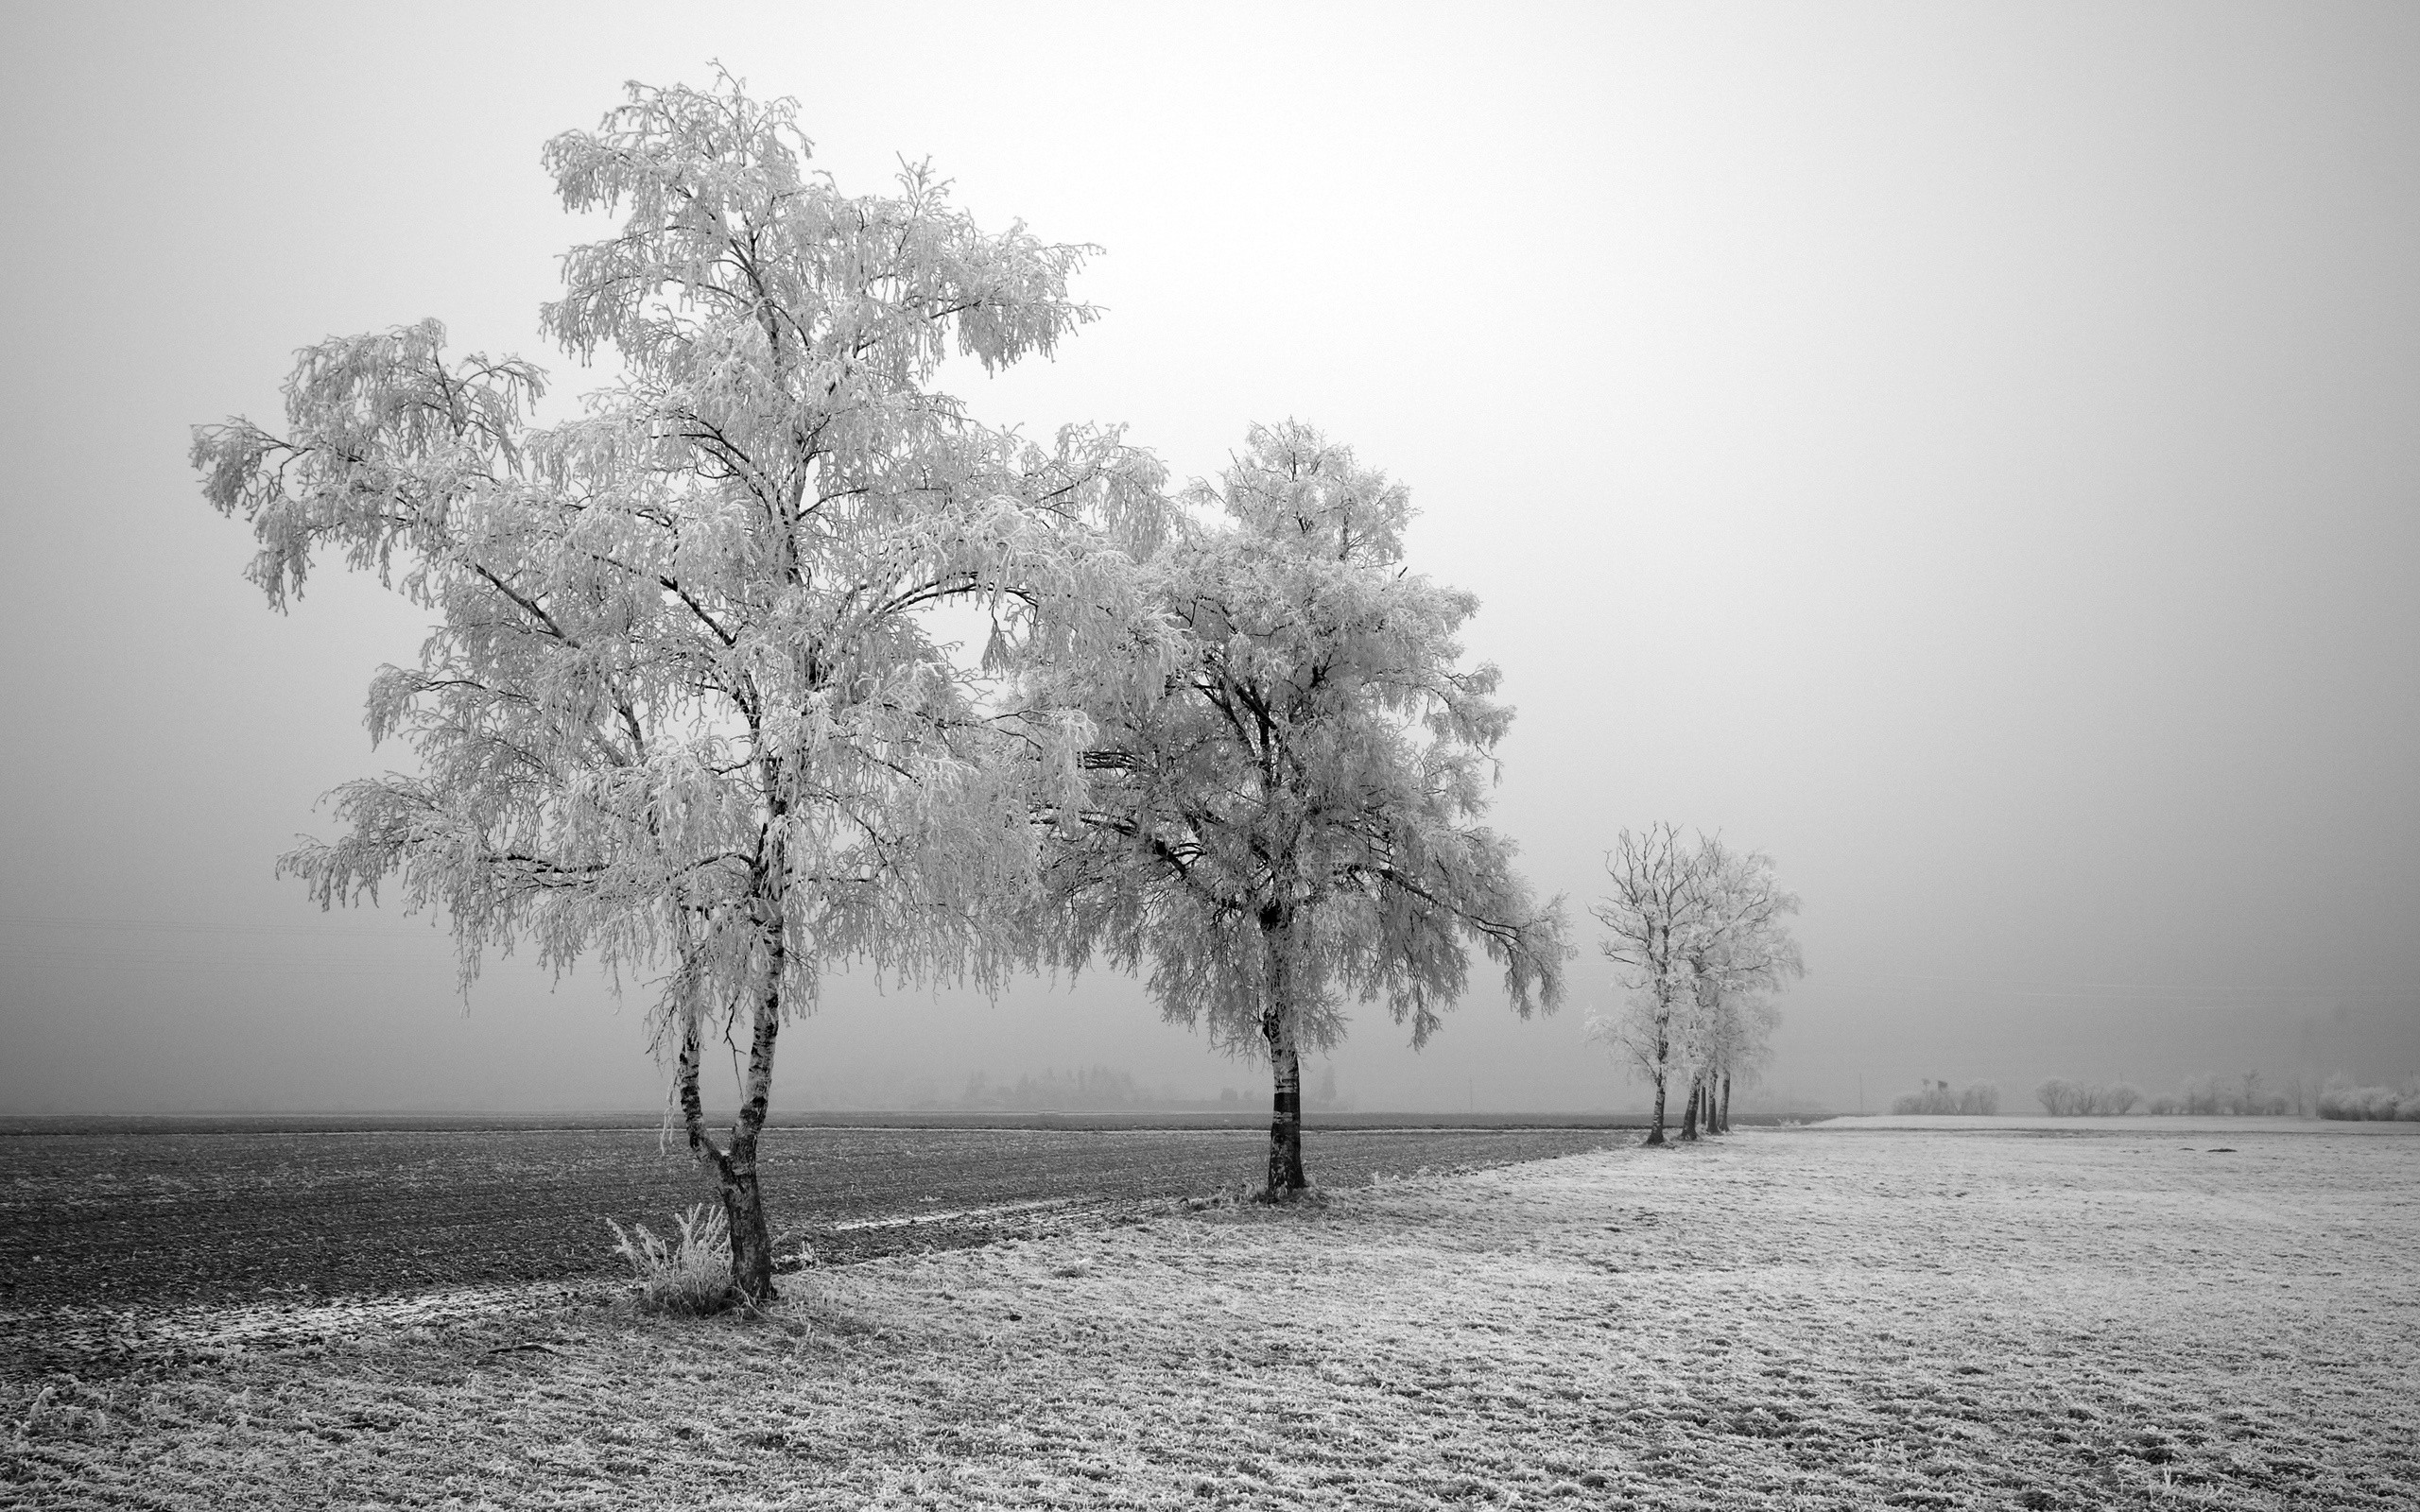 General 2560x1600 landscape nature photography trees winter field frost monochrome birch outdoors cold